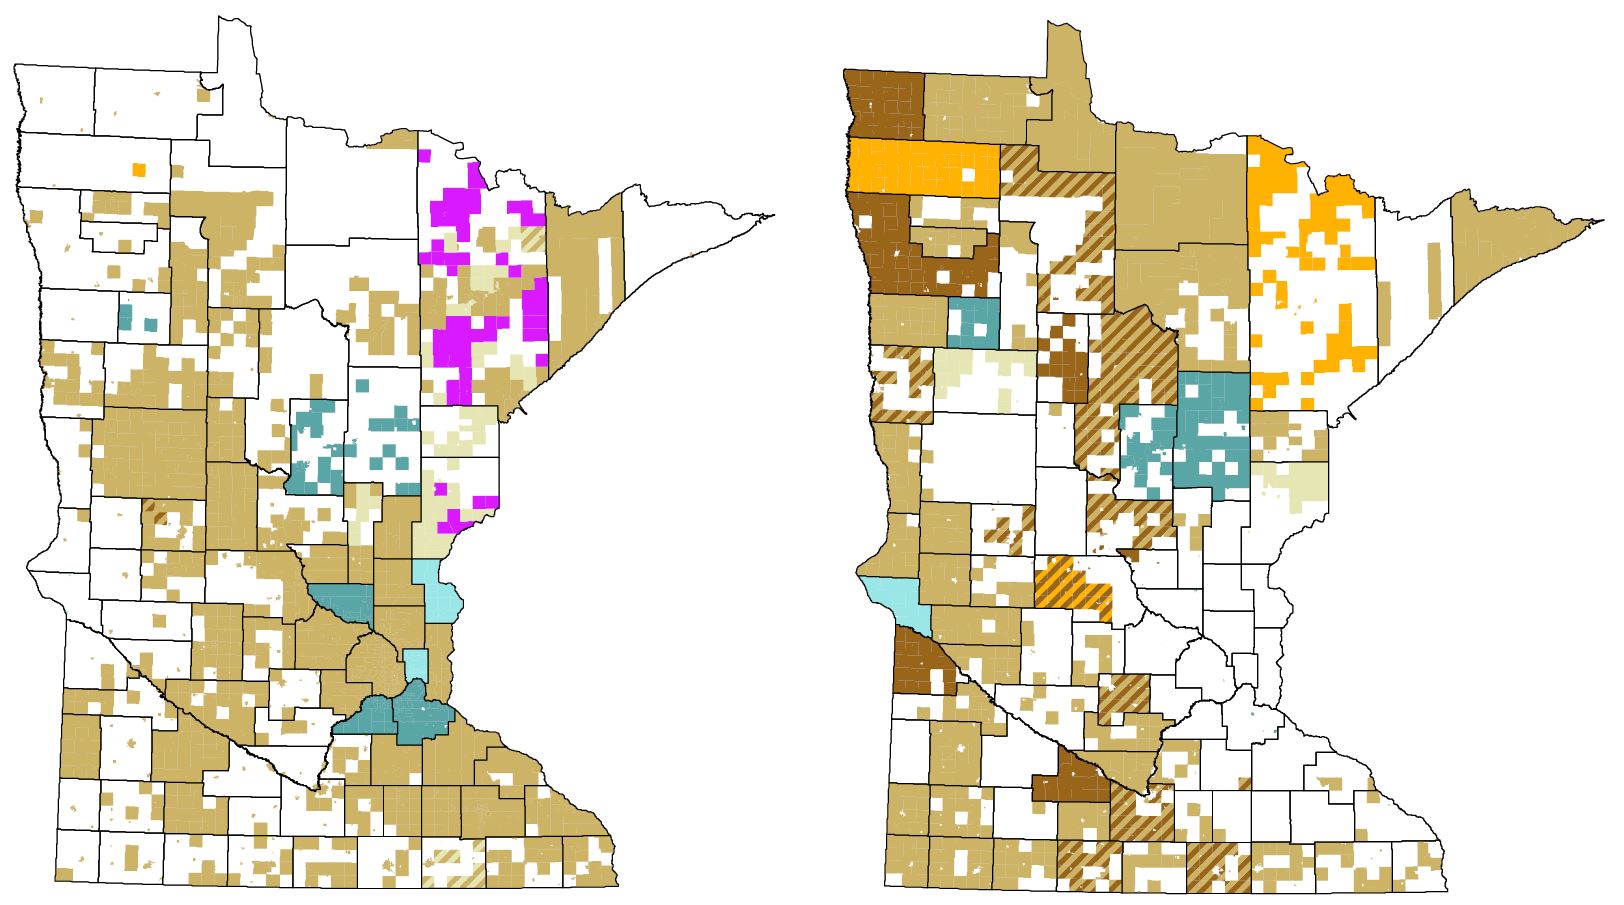 Voter tabulation equipment by precinct. Map on left is precincts with polling places, map on right is mail ballot precincts. Colors represent different models of equipment, see pdf for details.